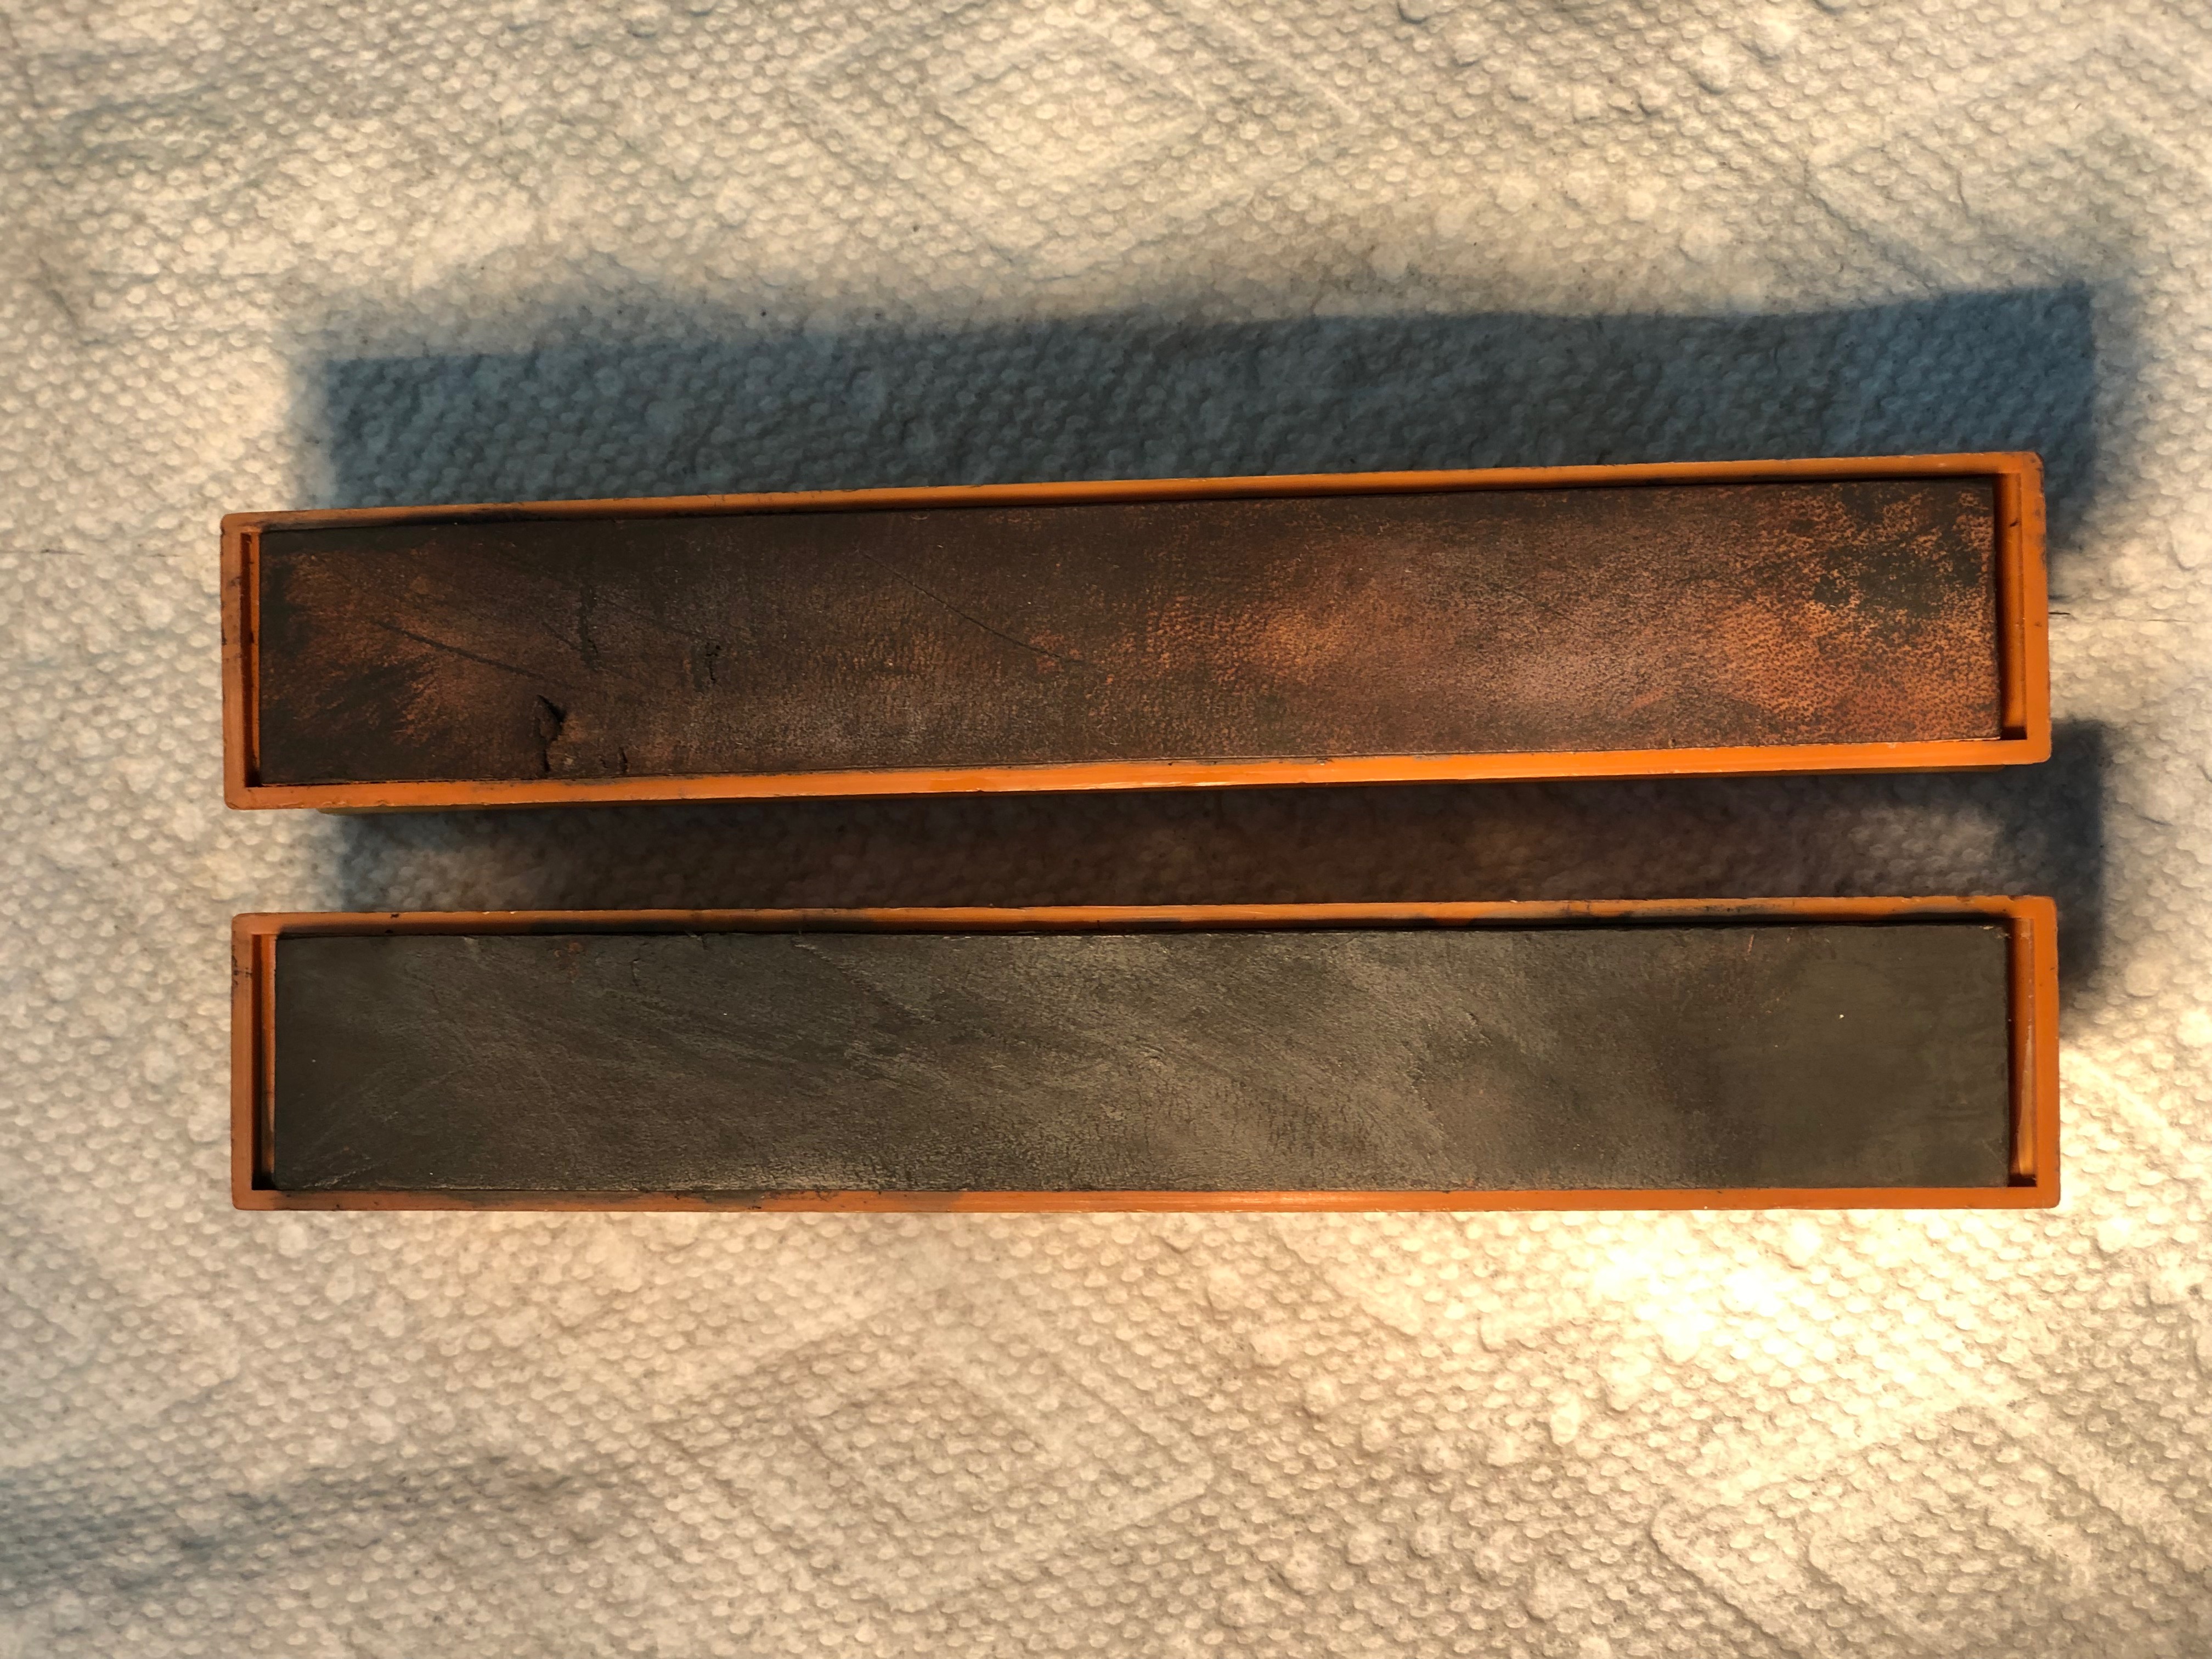 Cleaning and Caring for Wicked Edge Stones and Strops